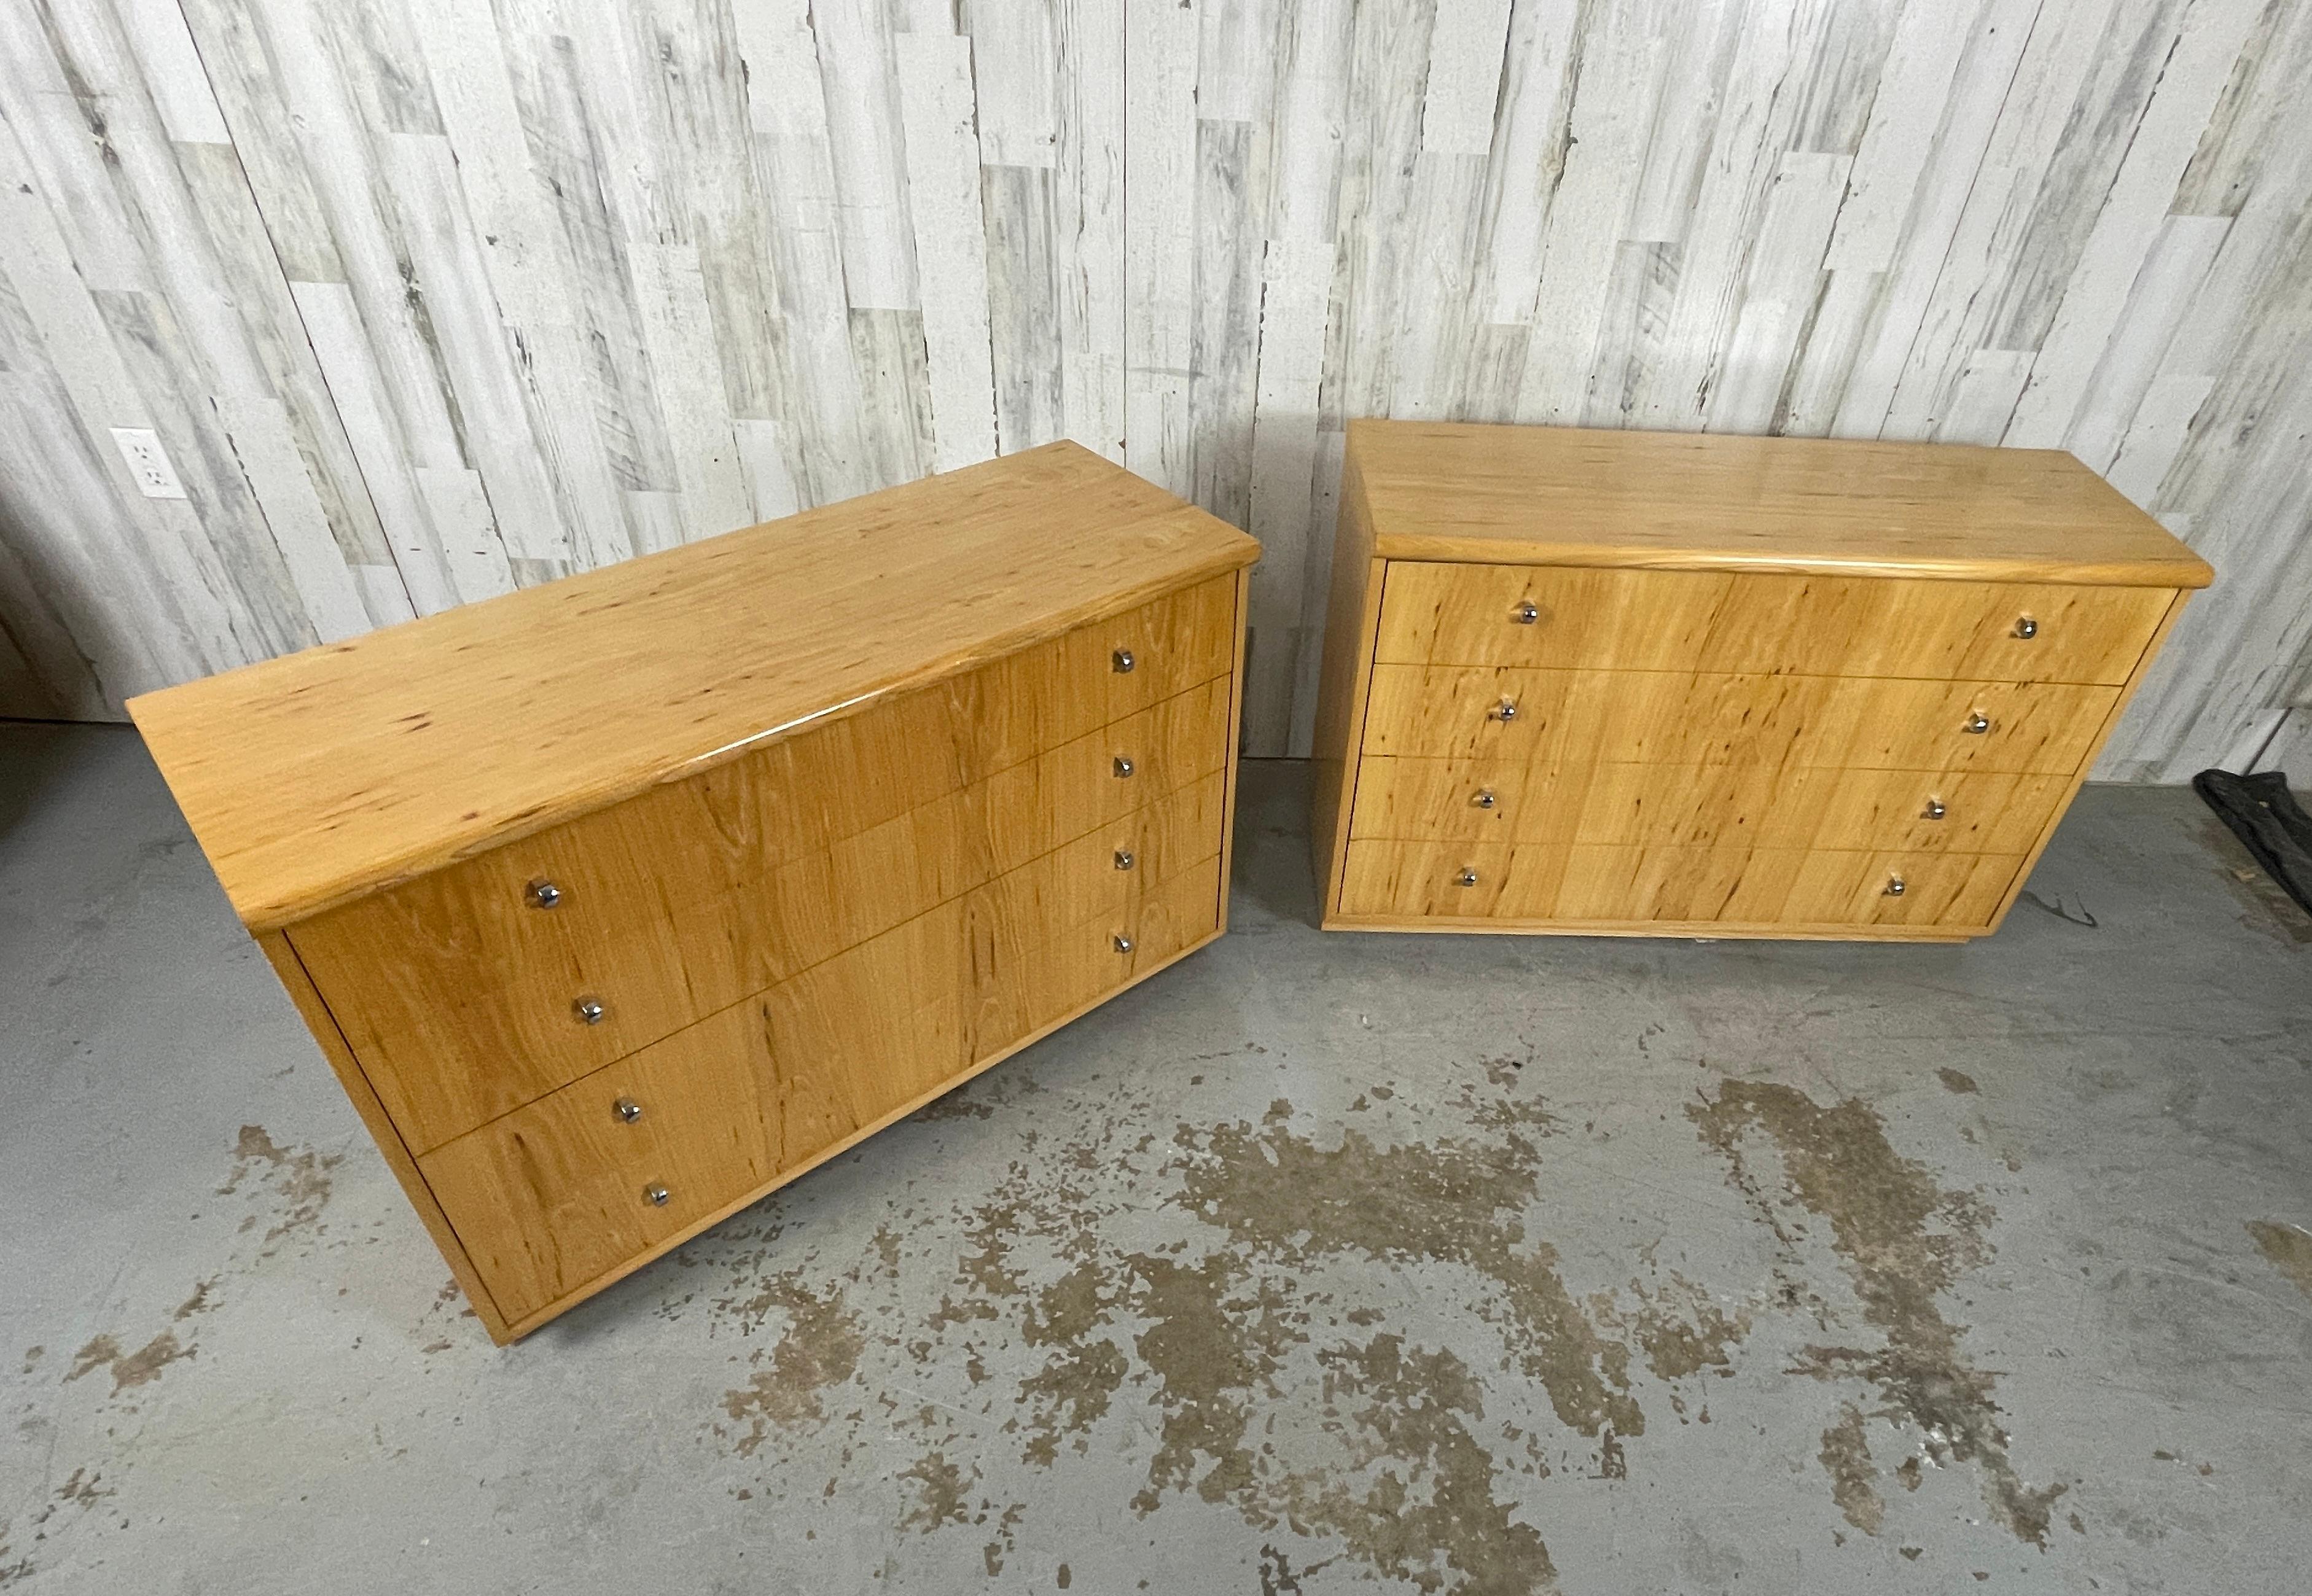 Pair of Founders Blonde Pecan Bachelor Chests / Nightsands.
Each chest measures 15.5 D X 43.25 W X 28.25 H